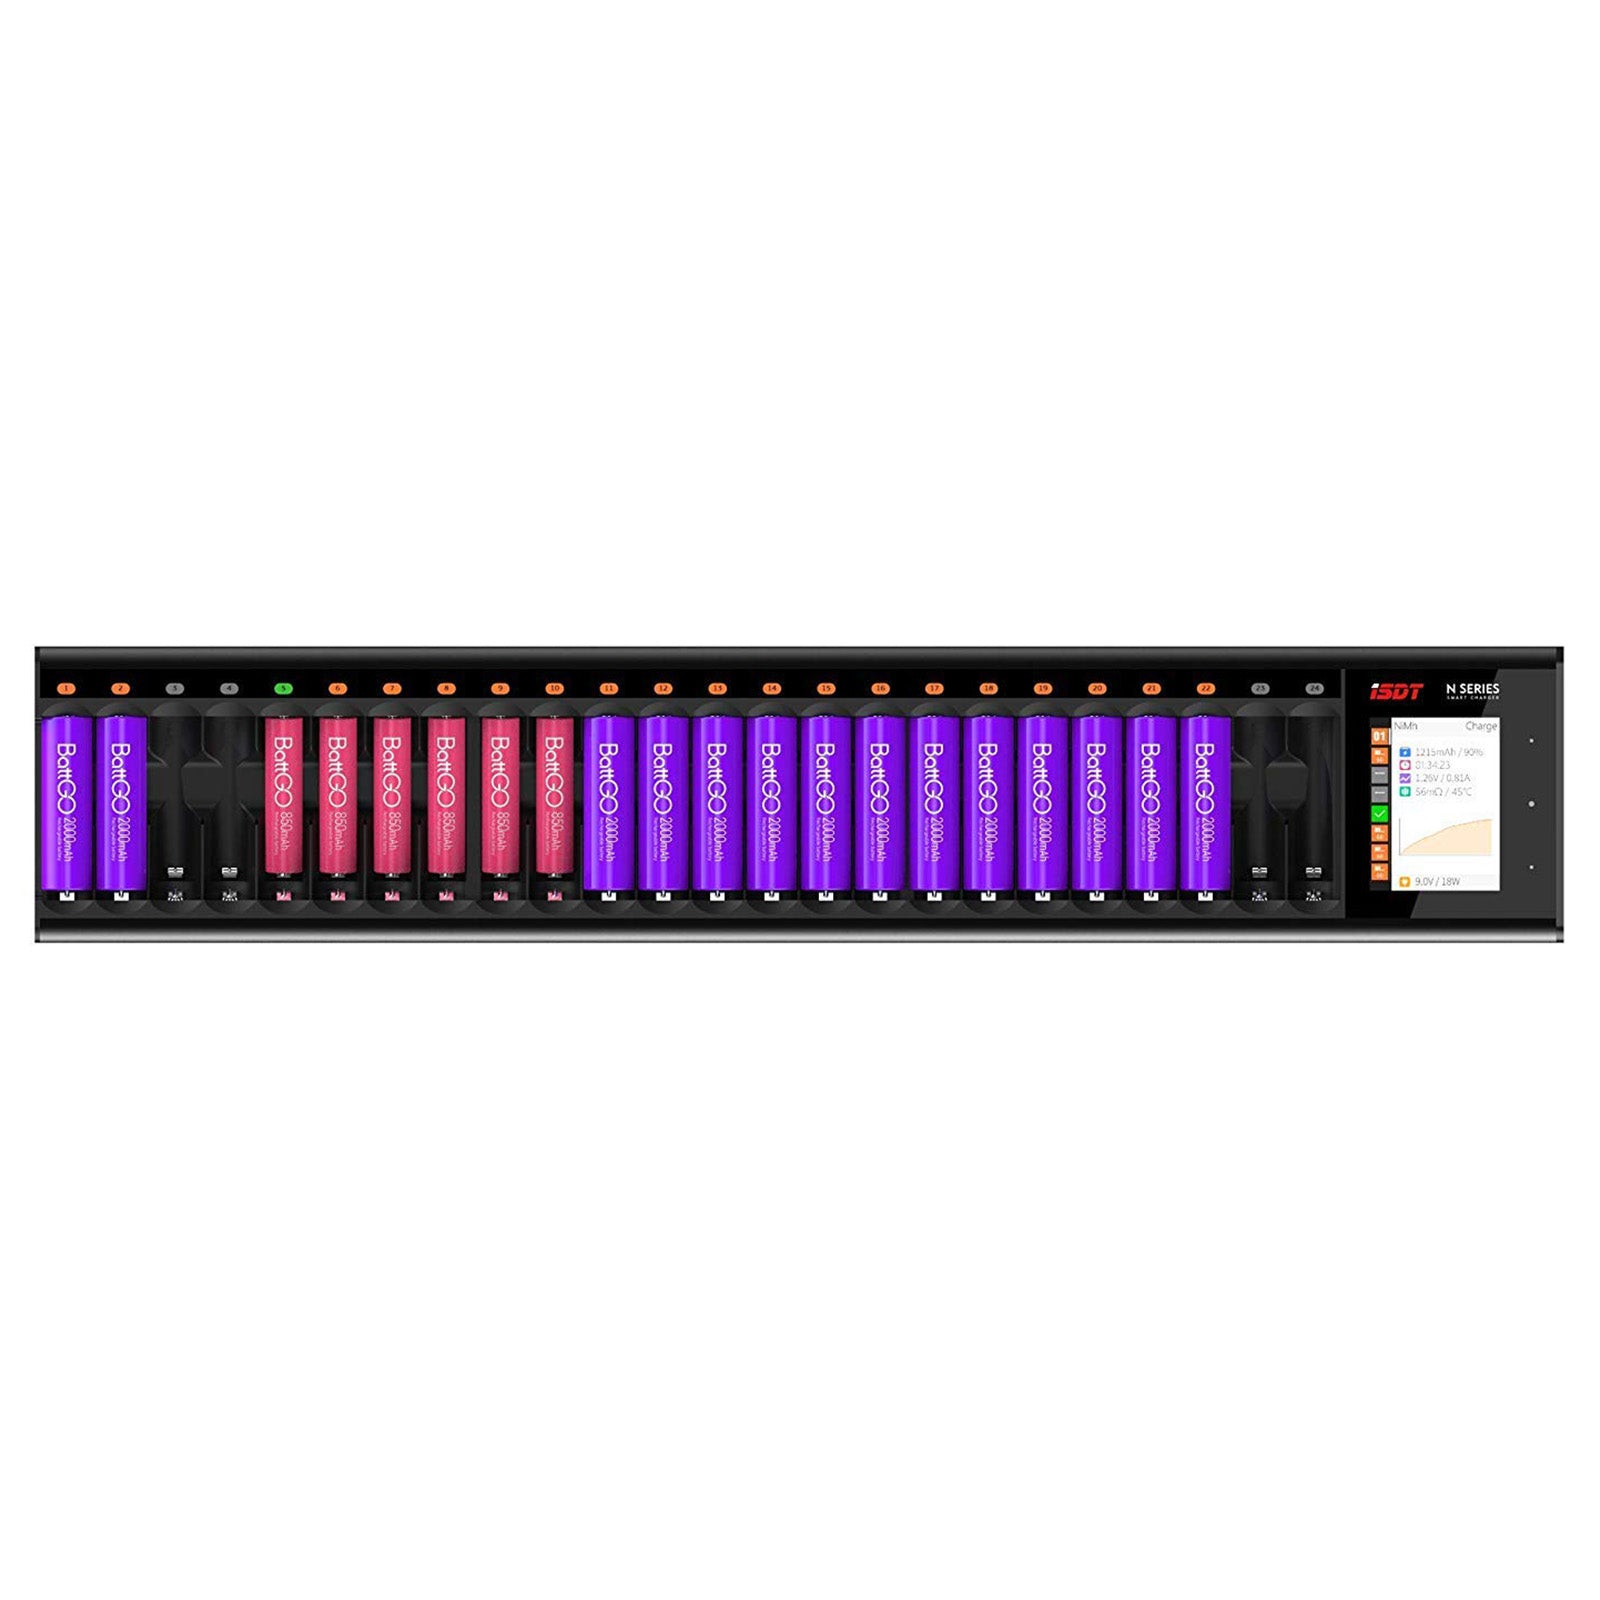 N24 LCD 24-Slot Battery Charger for Rechargeable Batteries, 48W Fast Charger for AA/AAA Batteries ISDT